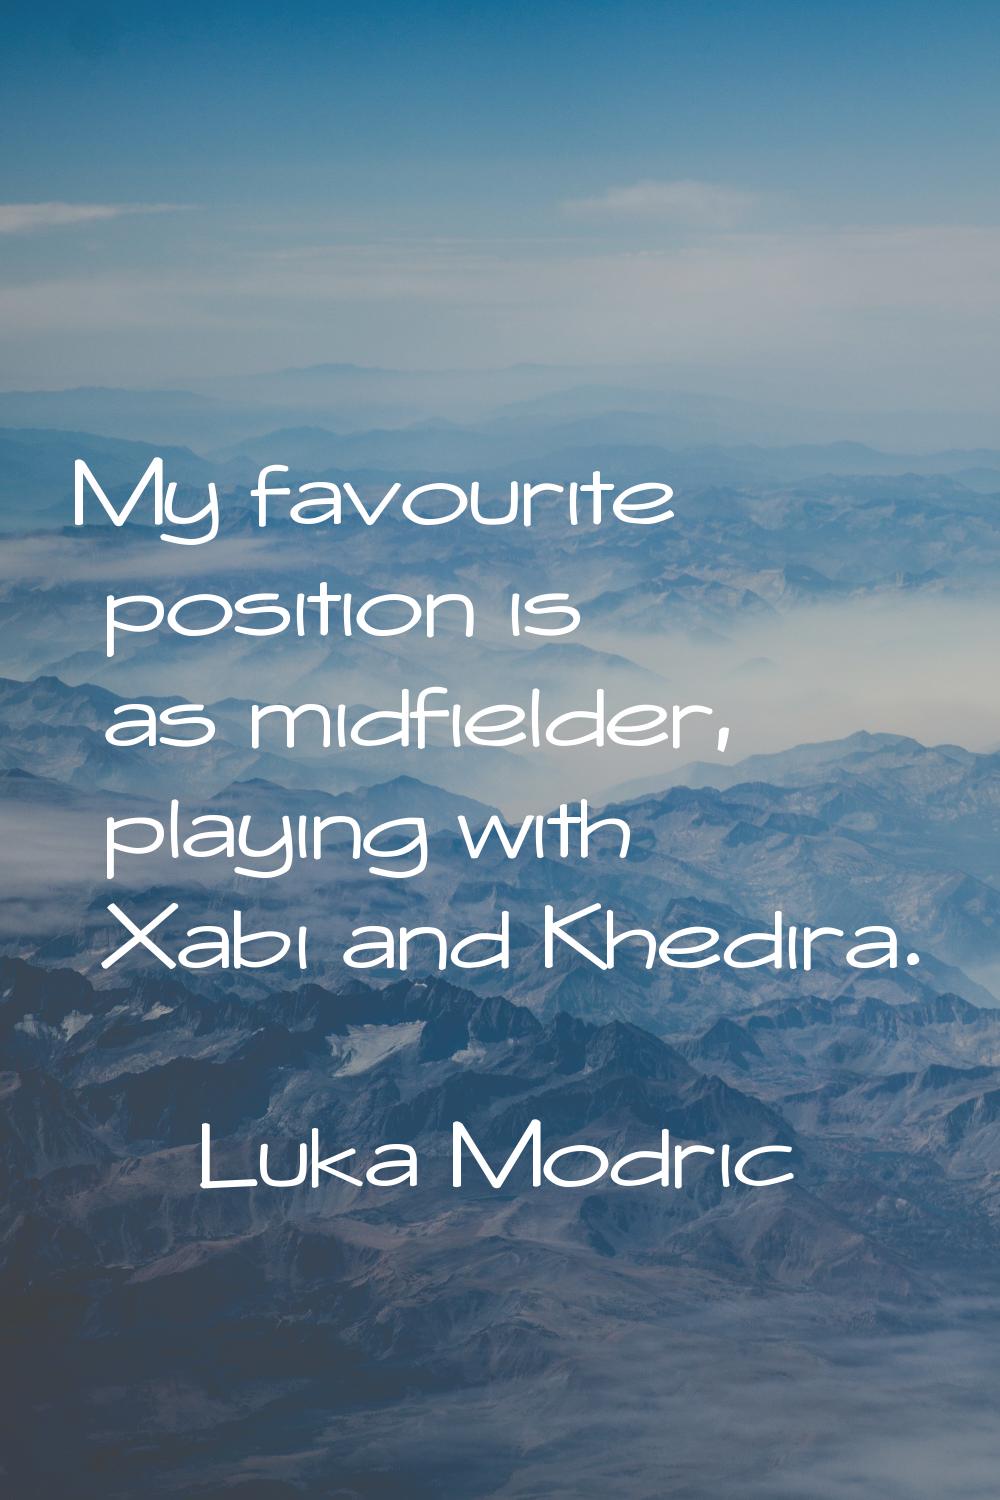 My favourite position is as midfielder, playing with Xabi and Khedira.